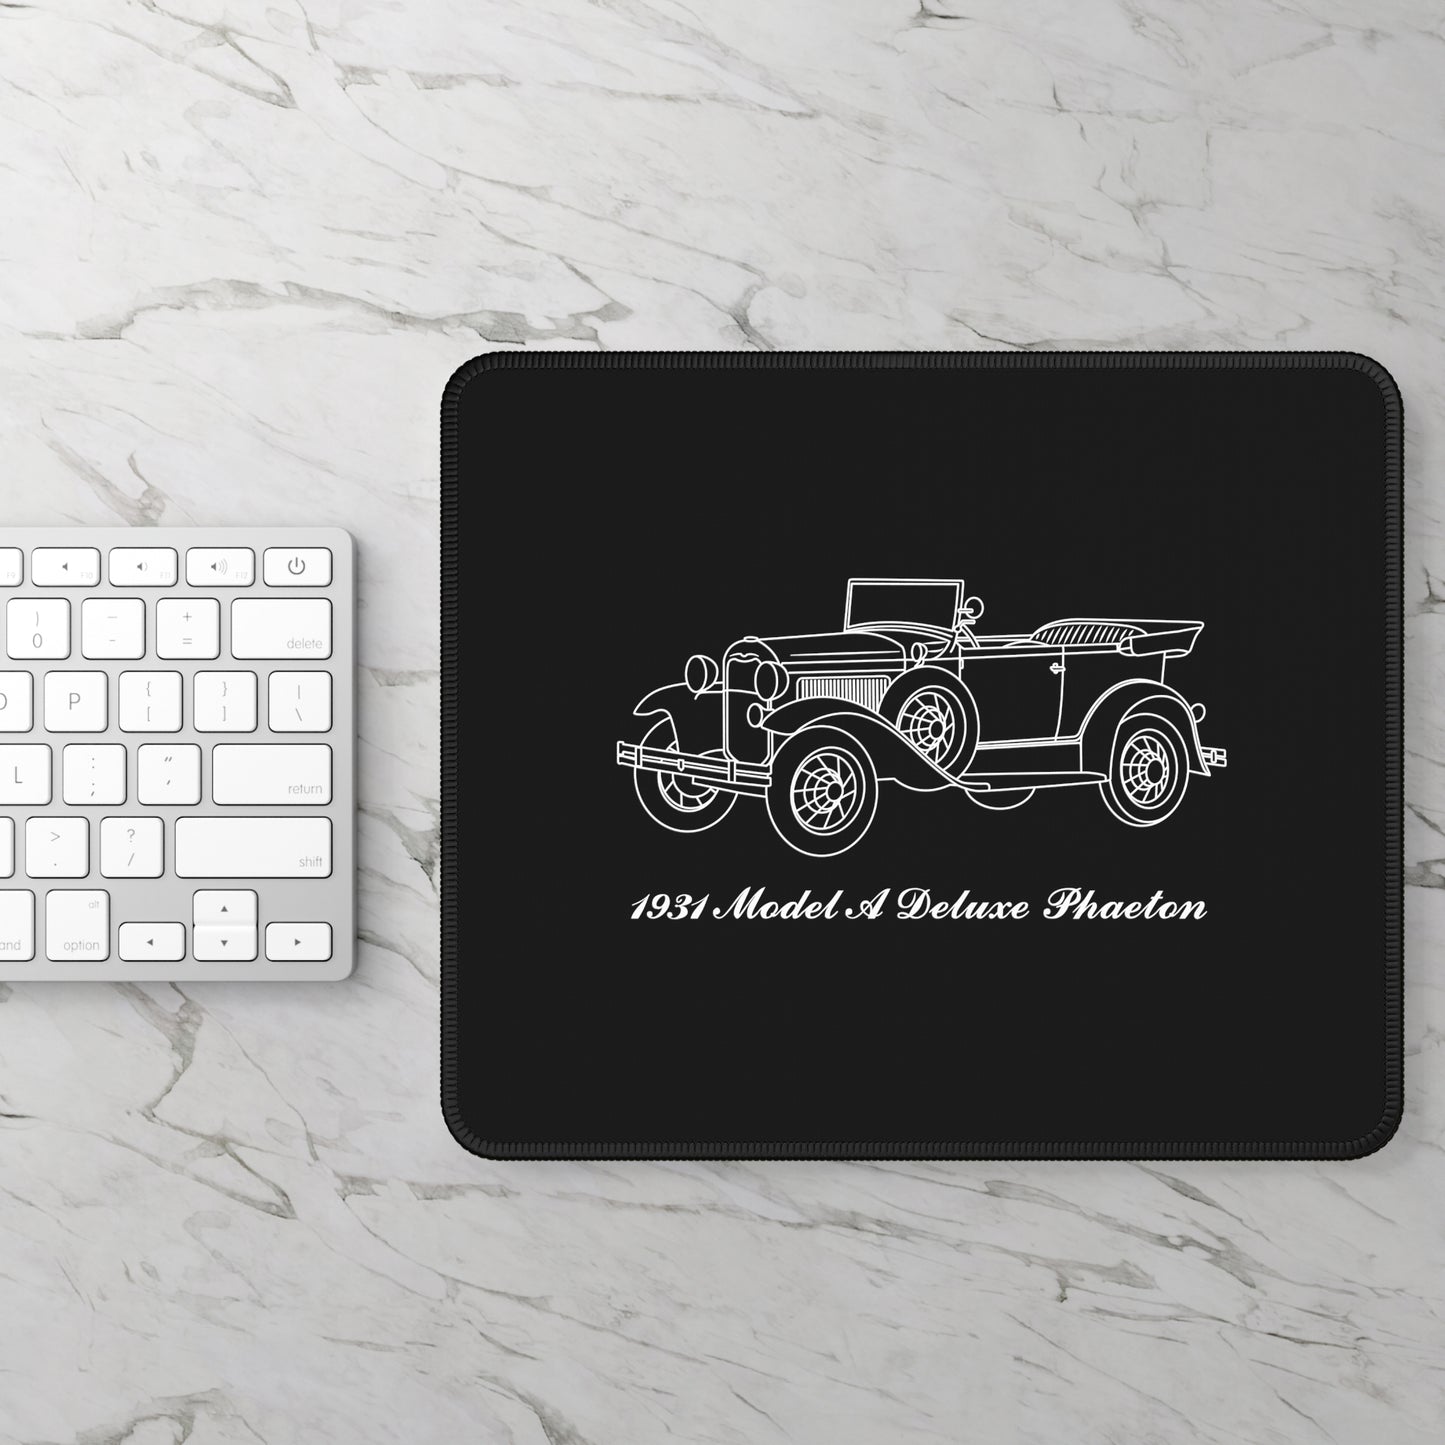 1931 Deluxe Phaeton Mouse Pad